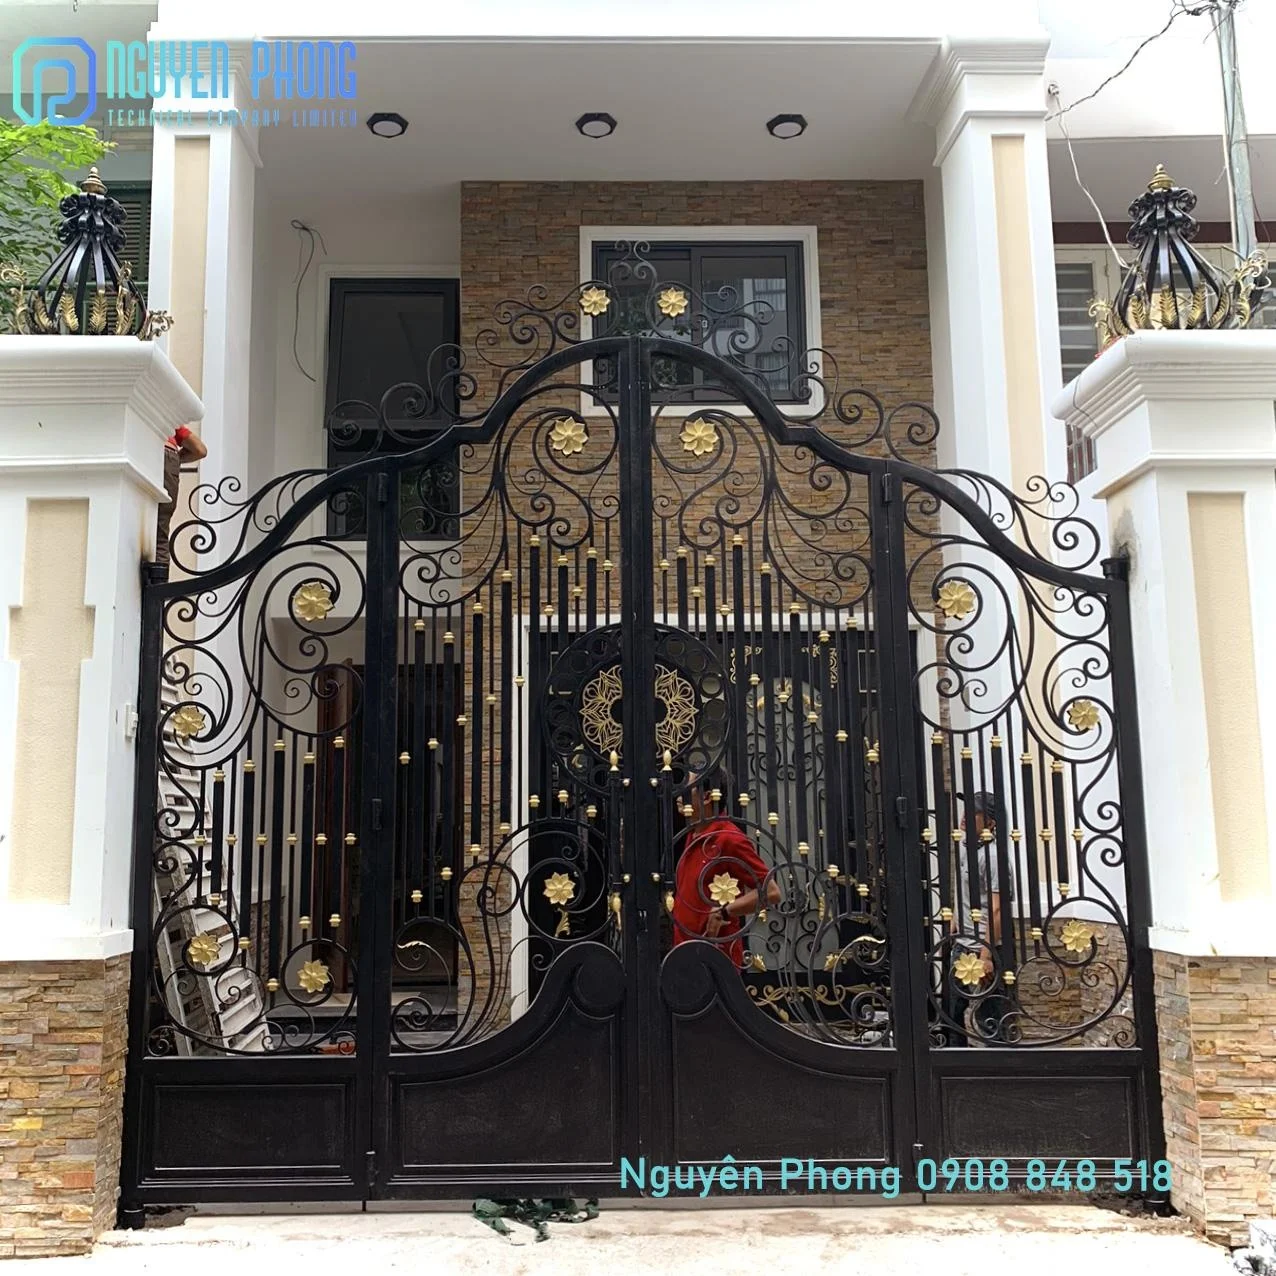 Iron Decorative Main Gate Designs With High Quality - Buy Wrought ...